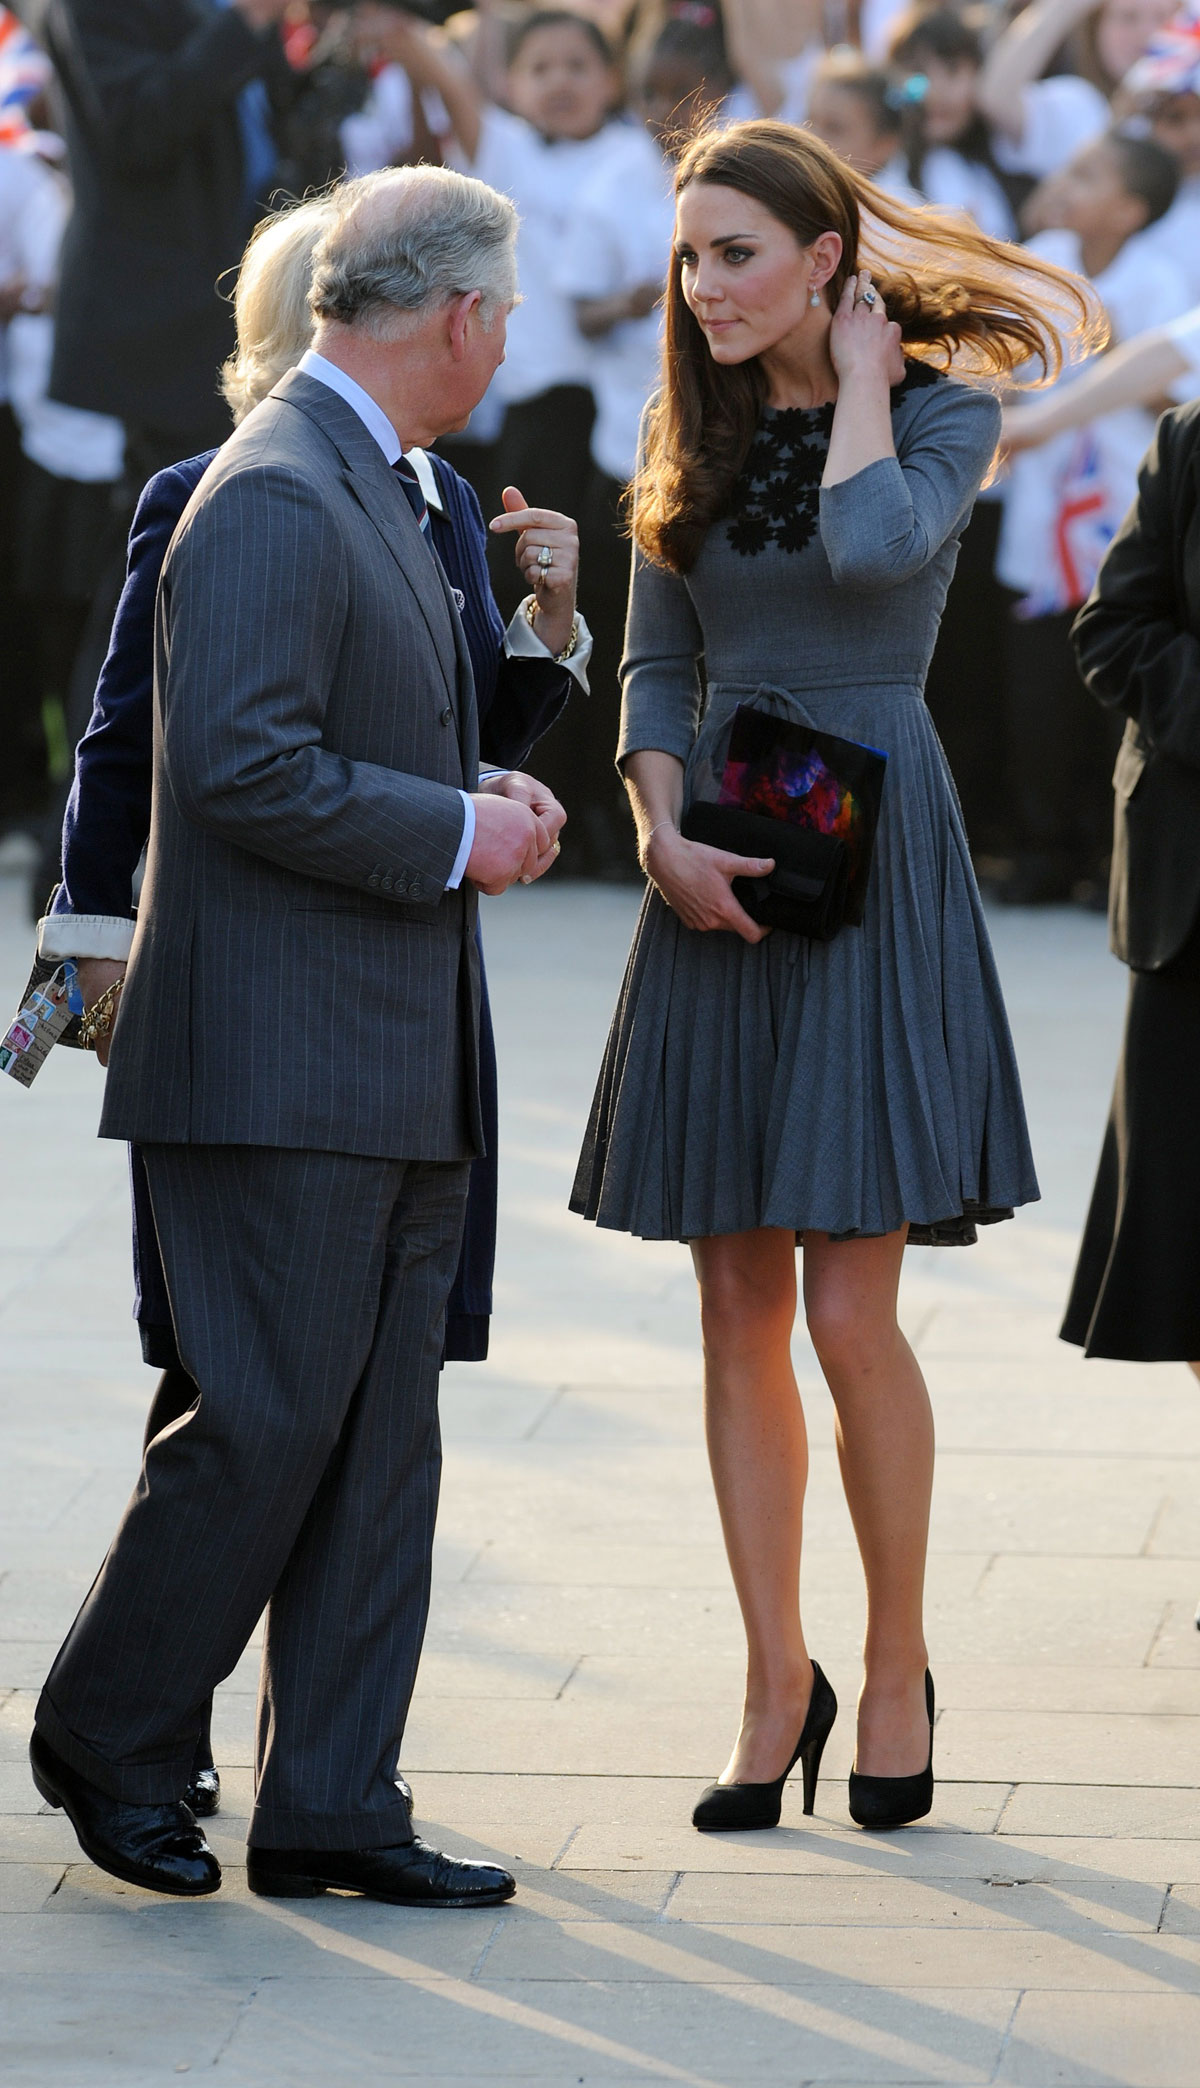 KATE MIDDLETON visits Dulwich Picture Gallery in London